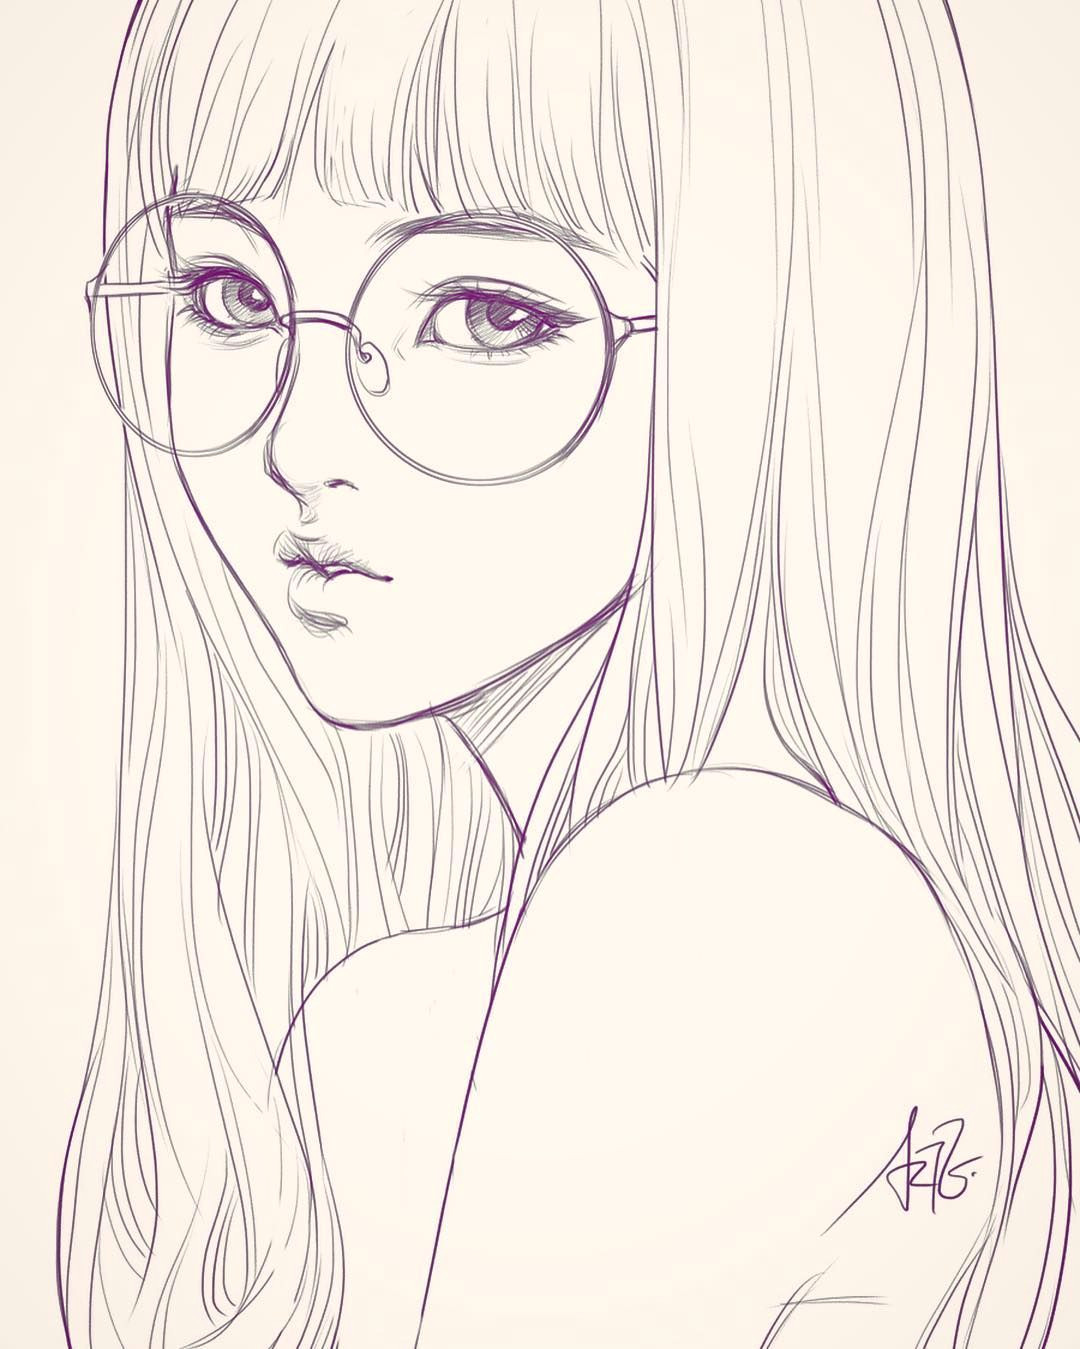 last sketch of girl with glasses having bad backache it hurts